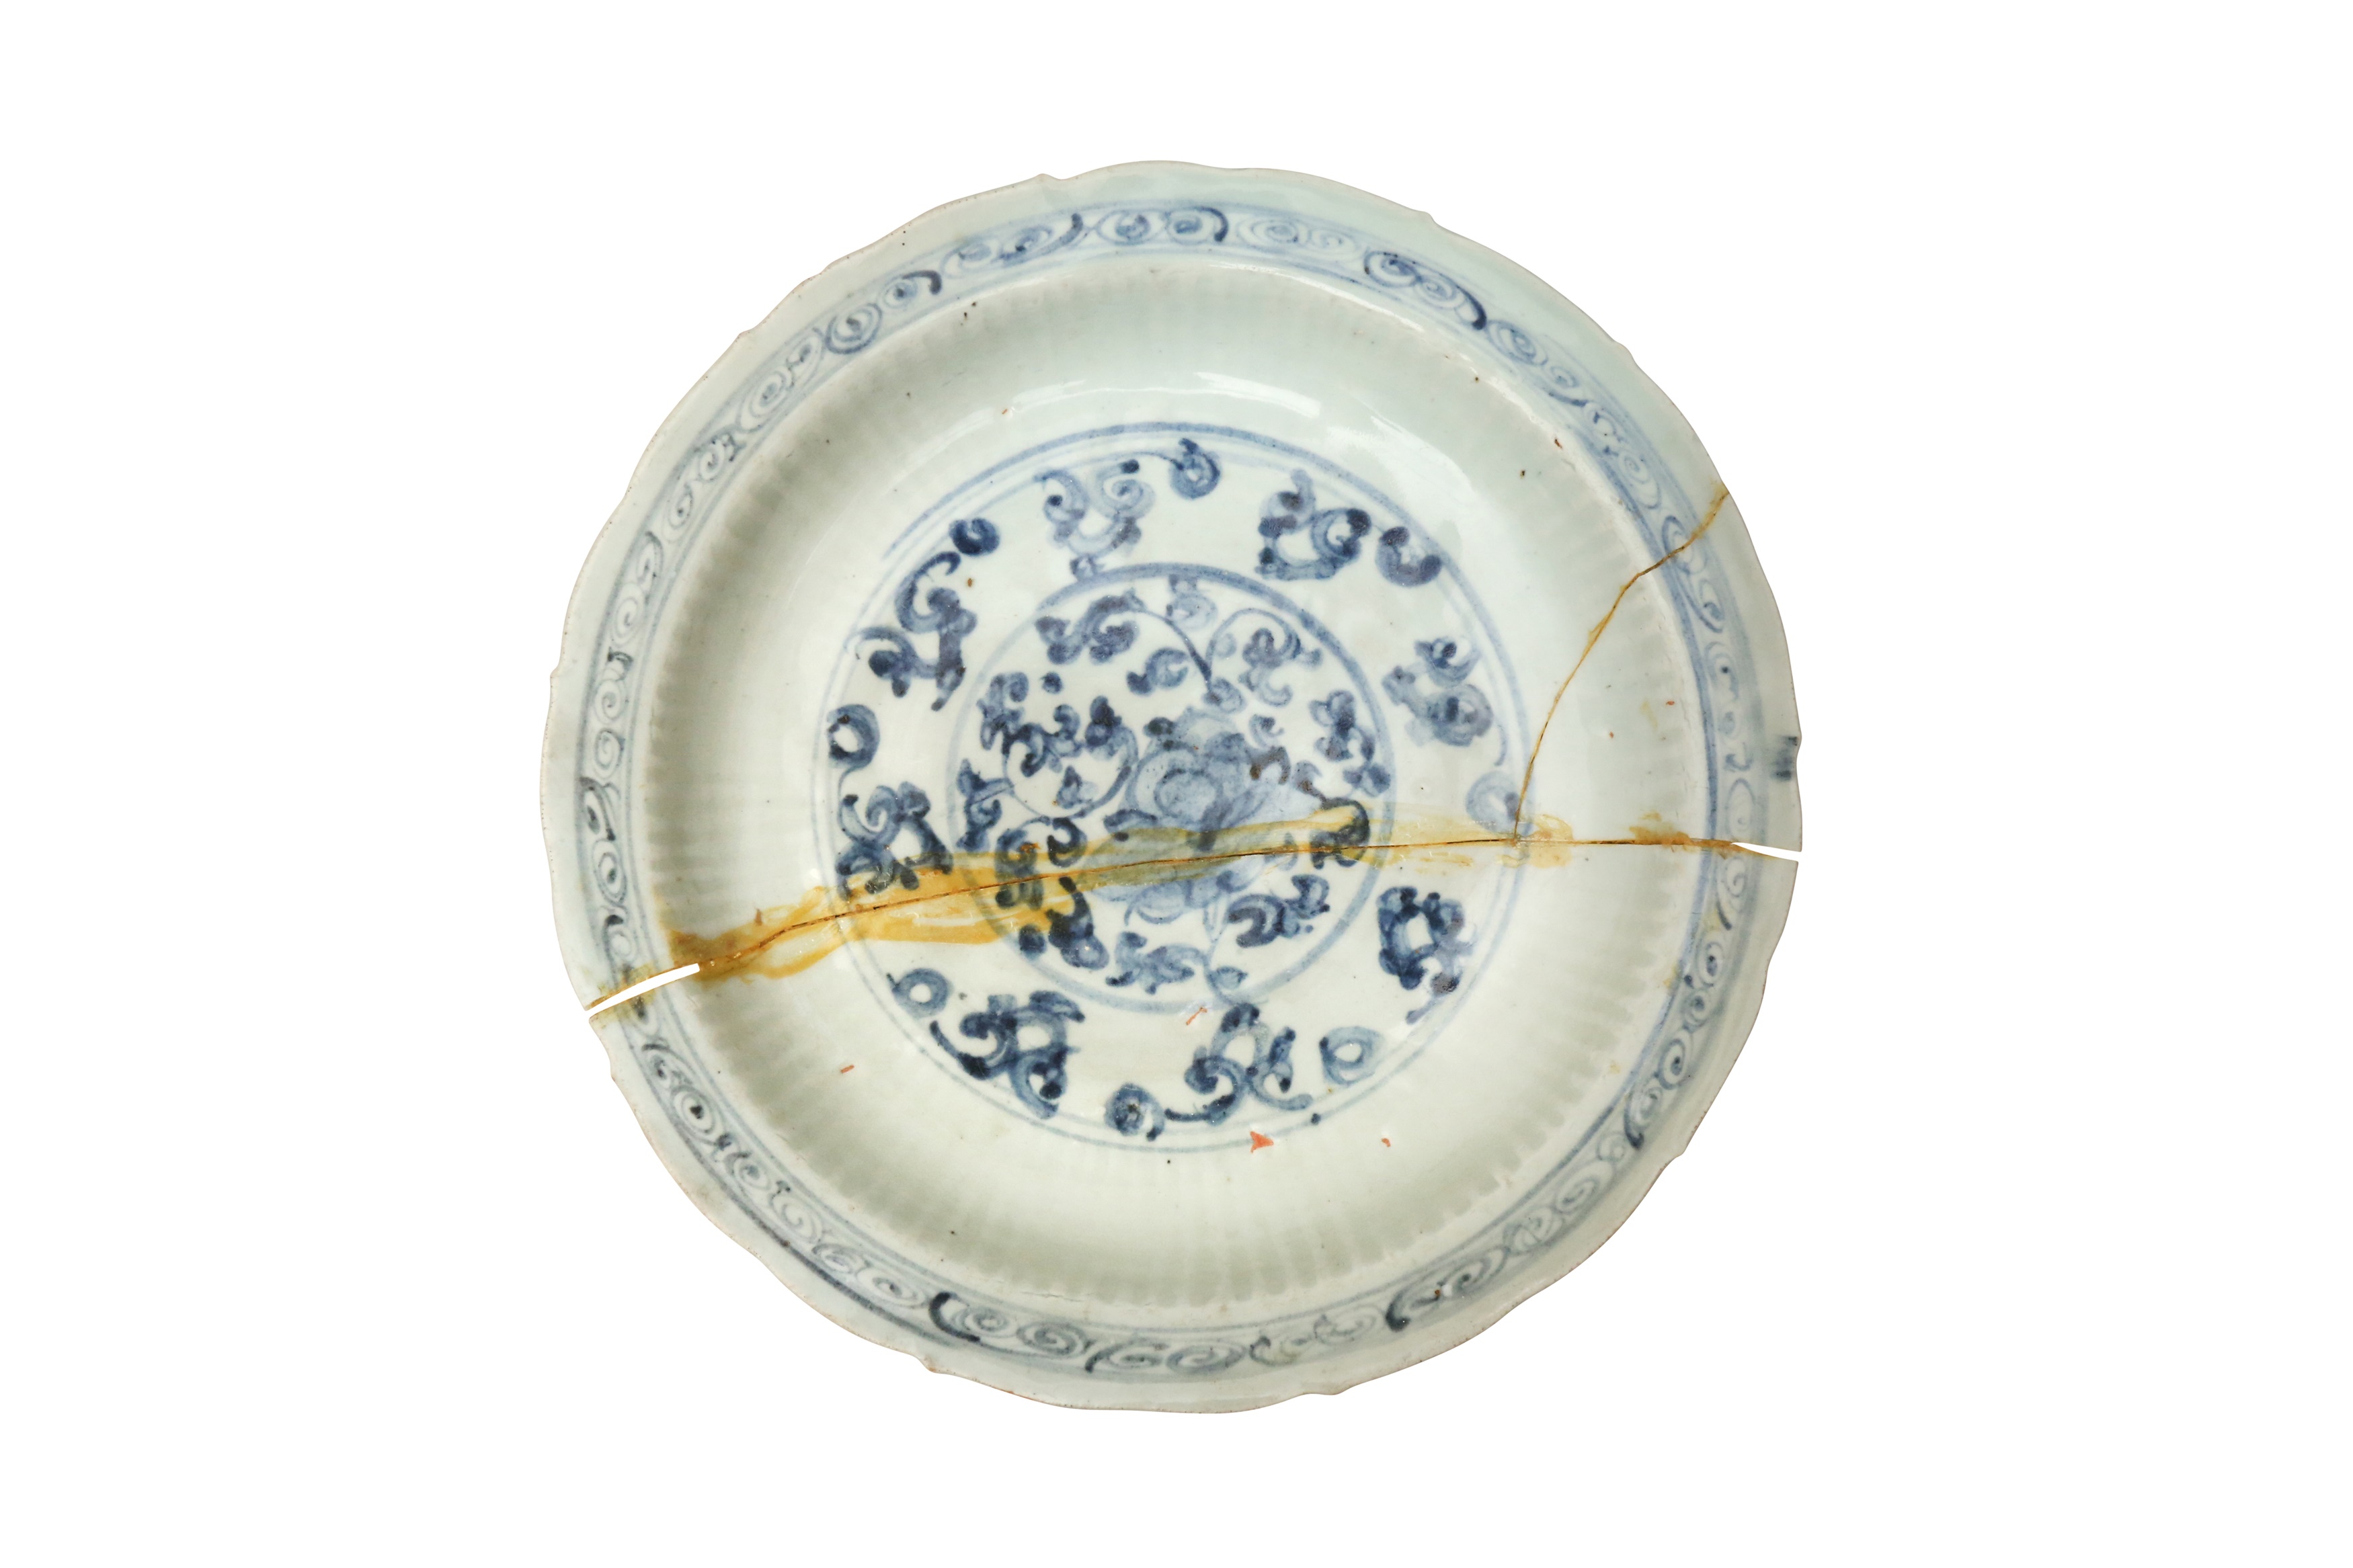 TWO CHINESE BLUE AND WHITE DISHES 明或清 青花花卉紋盤兩件 - Image 2 of 3